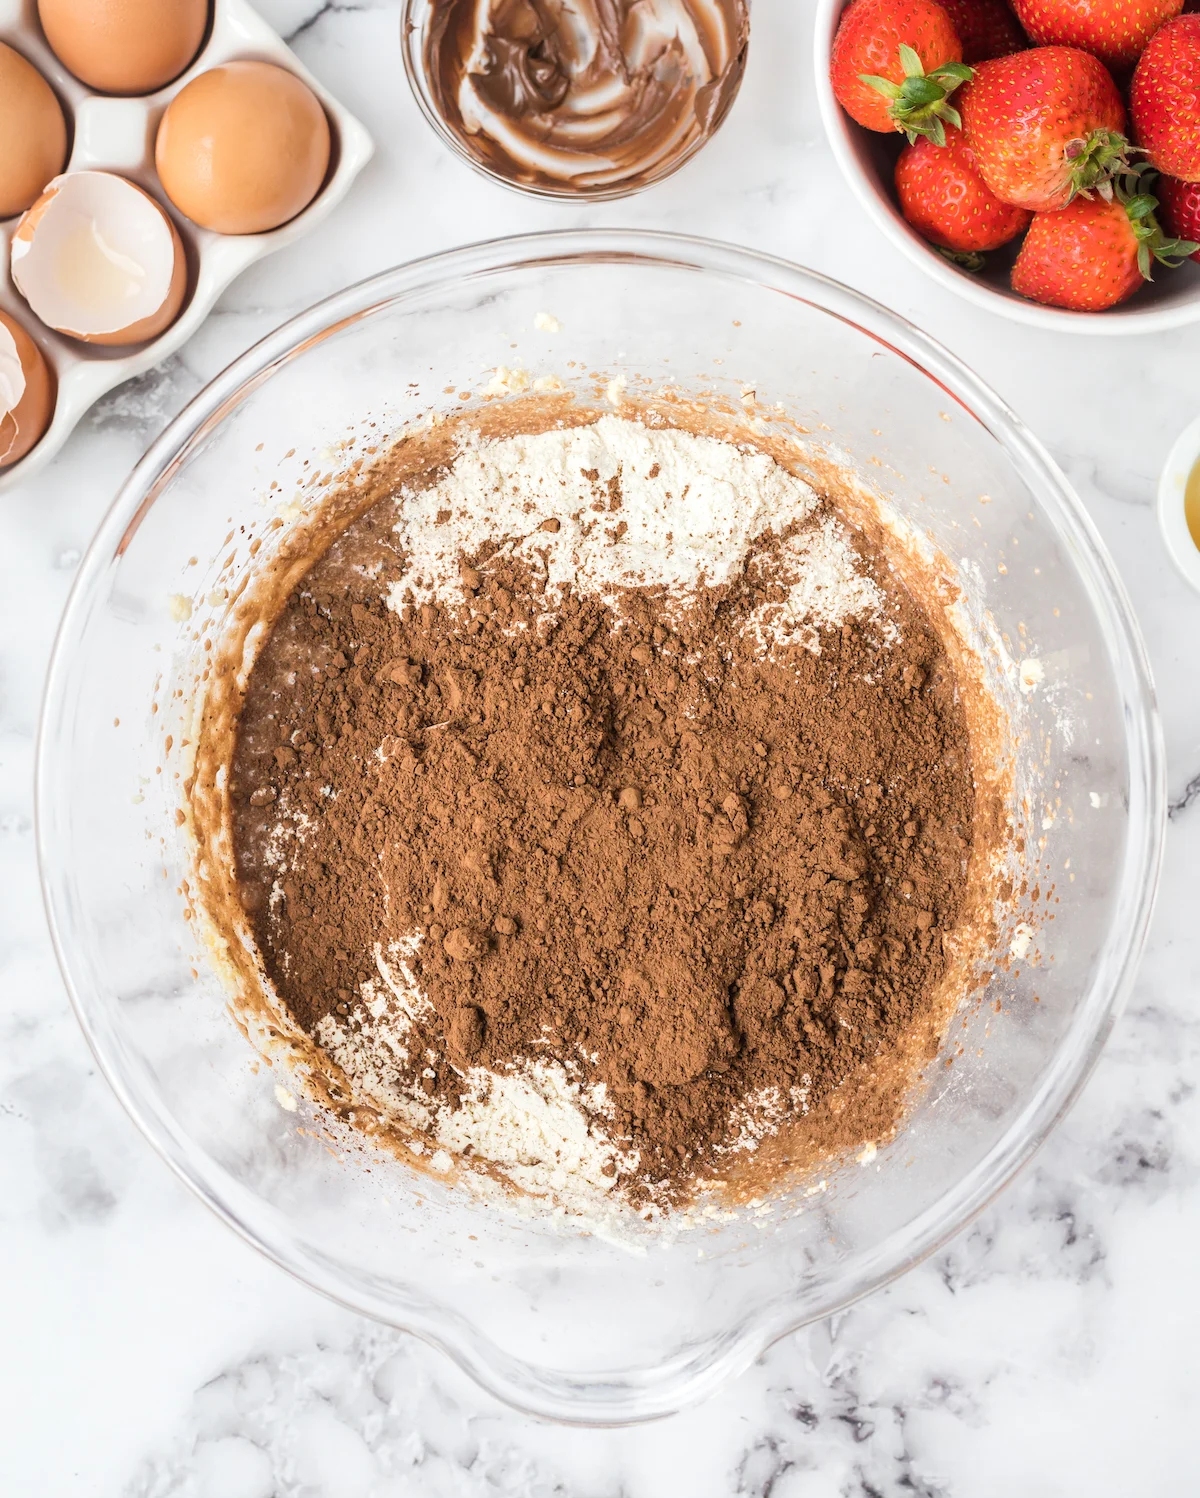 Dry ingredients added to the nutella cupcake batter